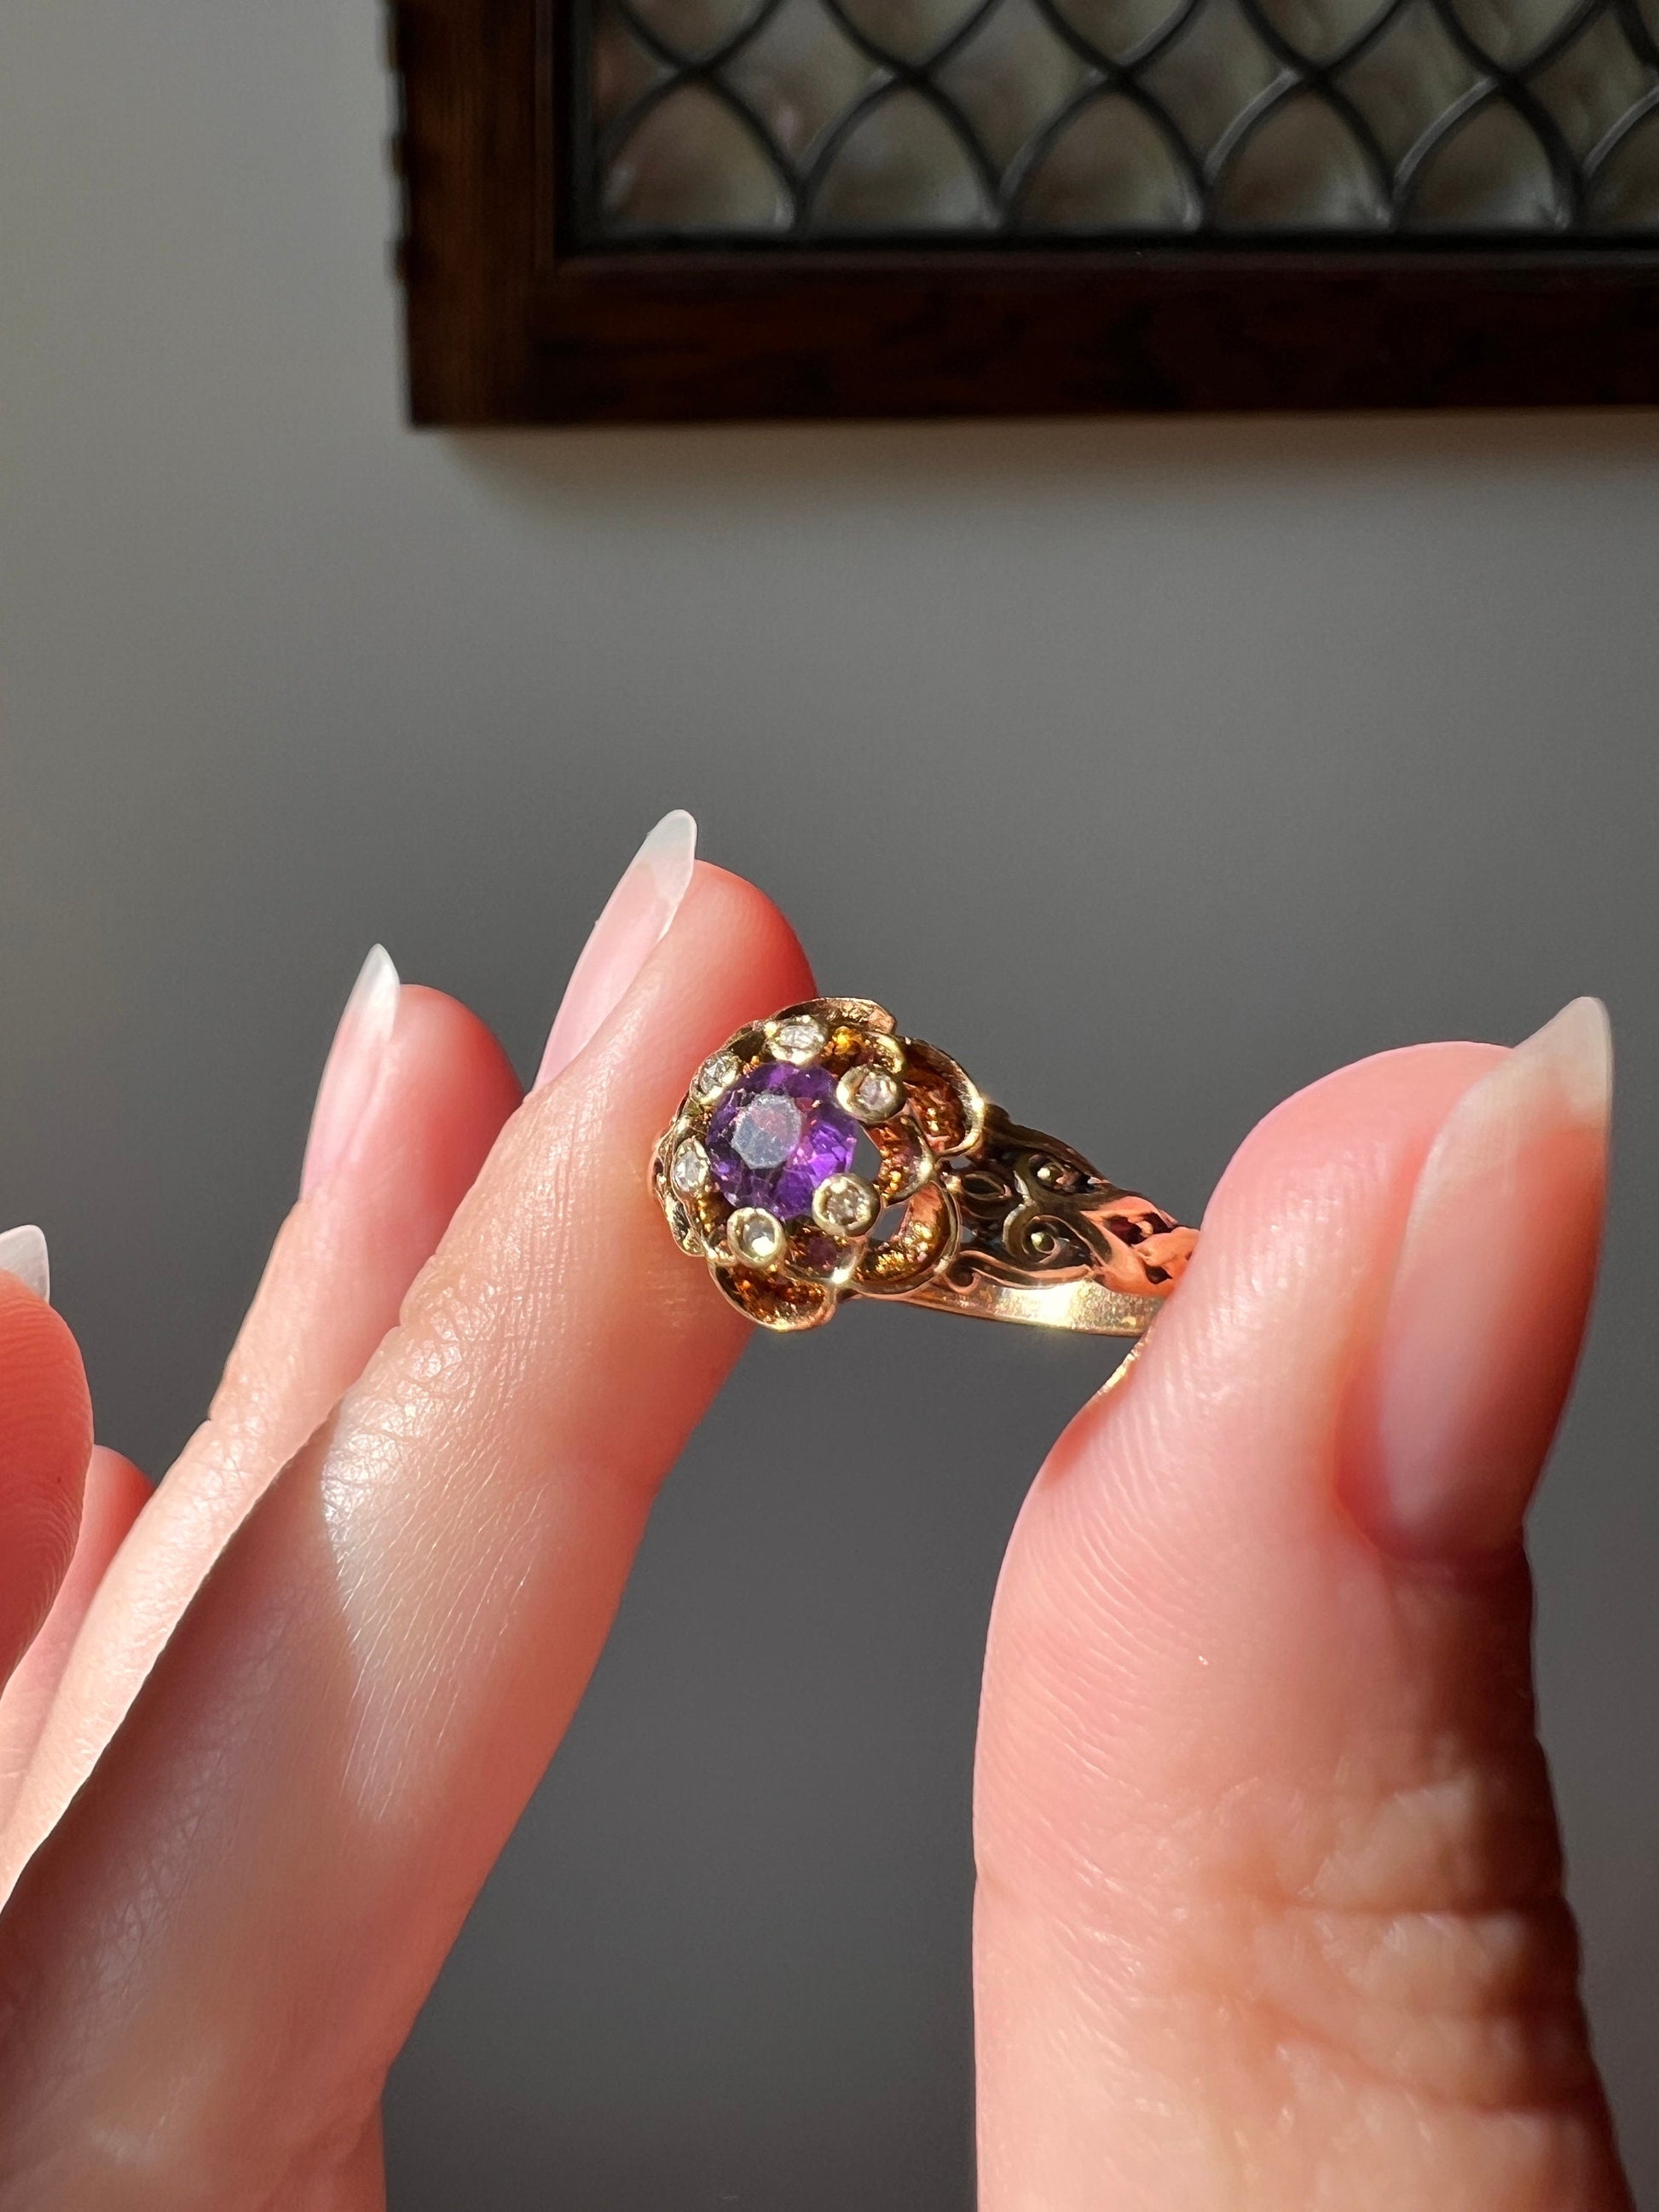 Victorian ANTIQUE Purple Amethyst Ring Rose Cut Diamond Gemset Prong Halo 18k Gold Braided Buttercup Ornate French Belle Epoque Stacker Gift